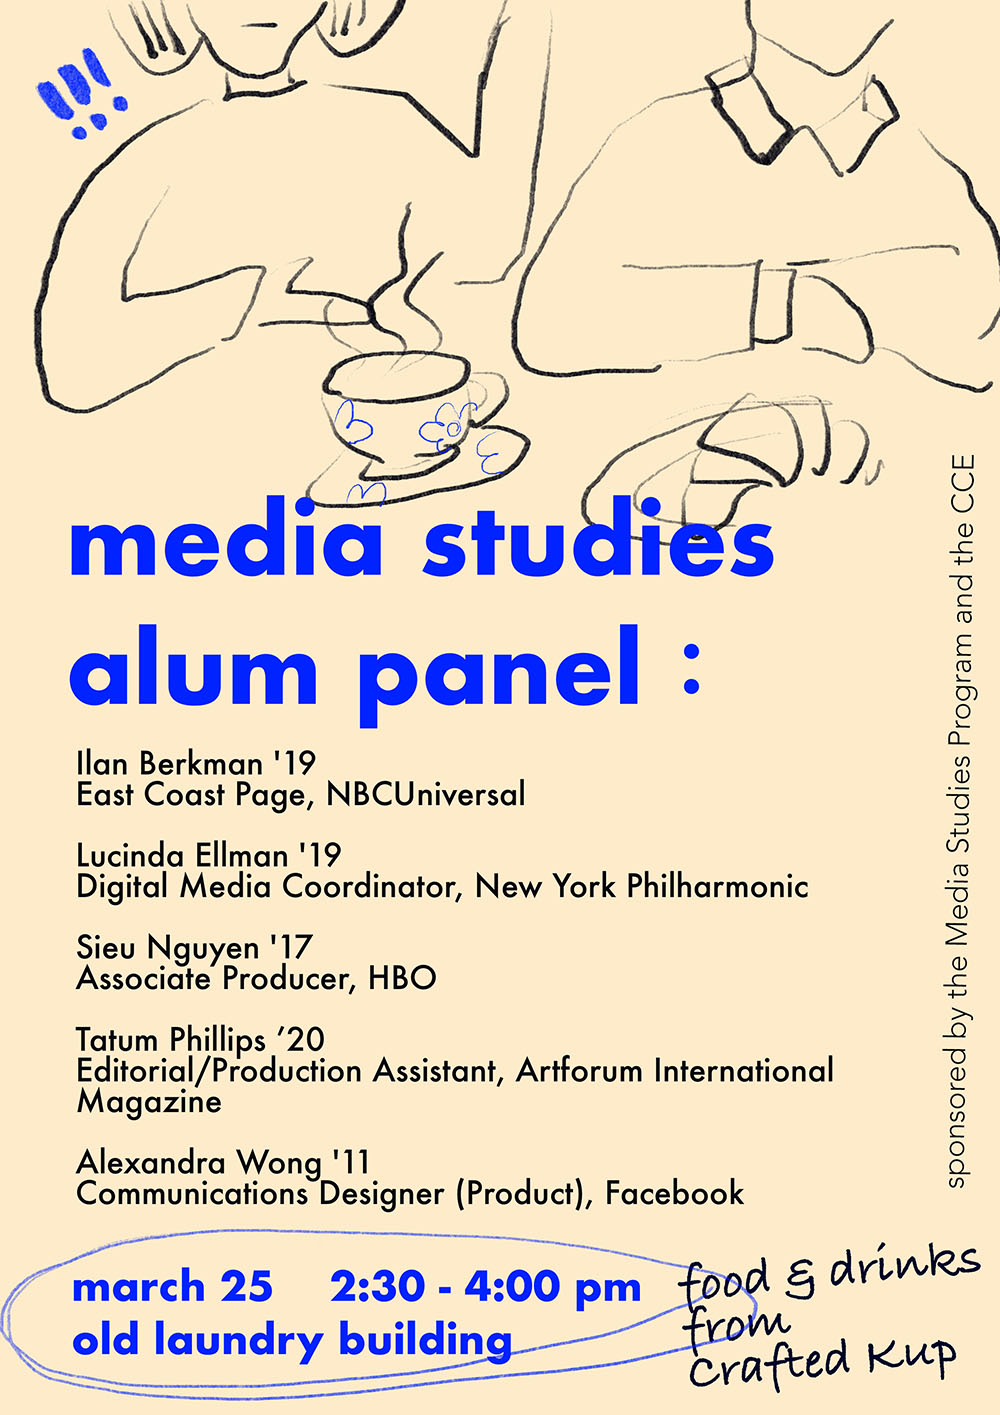 Poster for Media Studies Alum Panel with names of panel, date and time and food & drinks by Crafted Kup